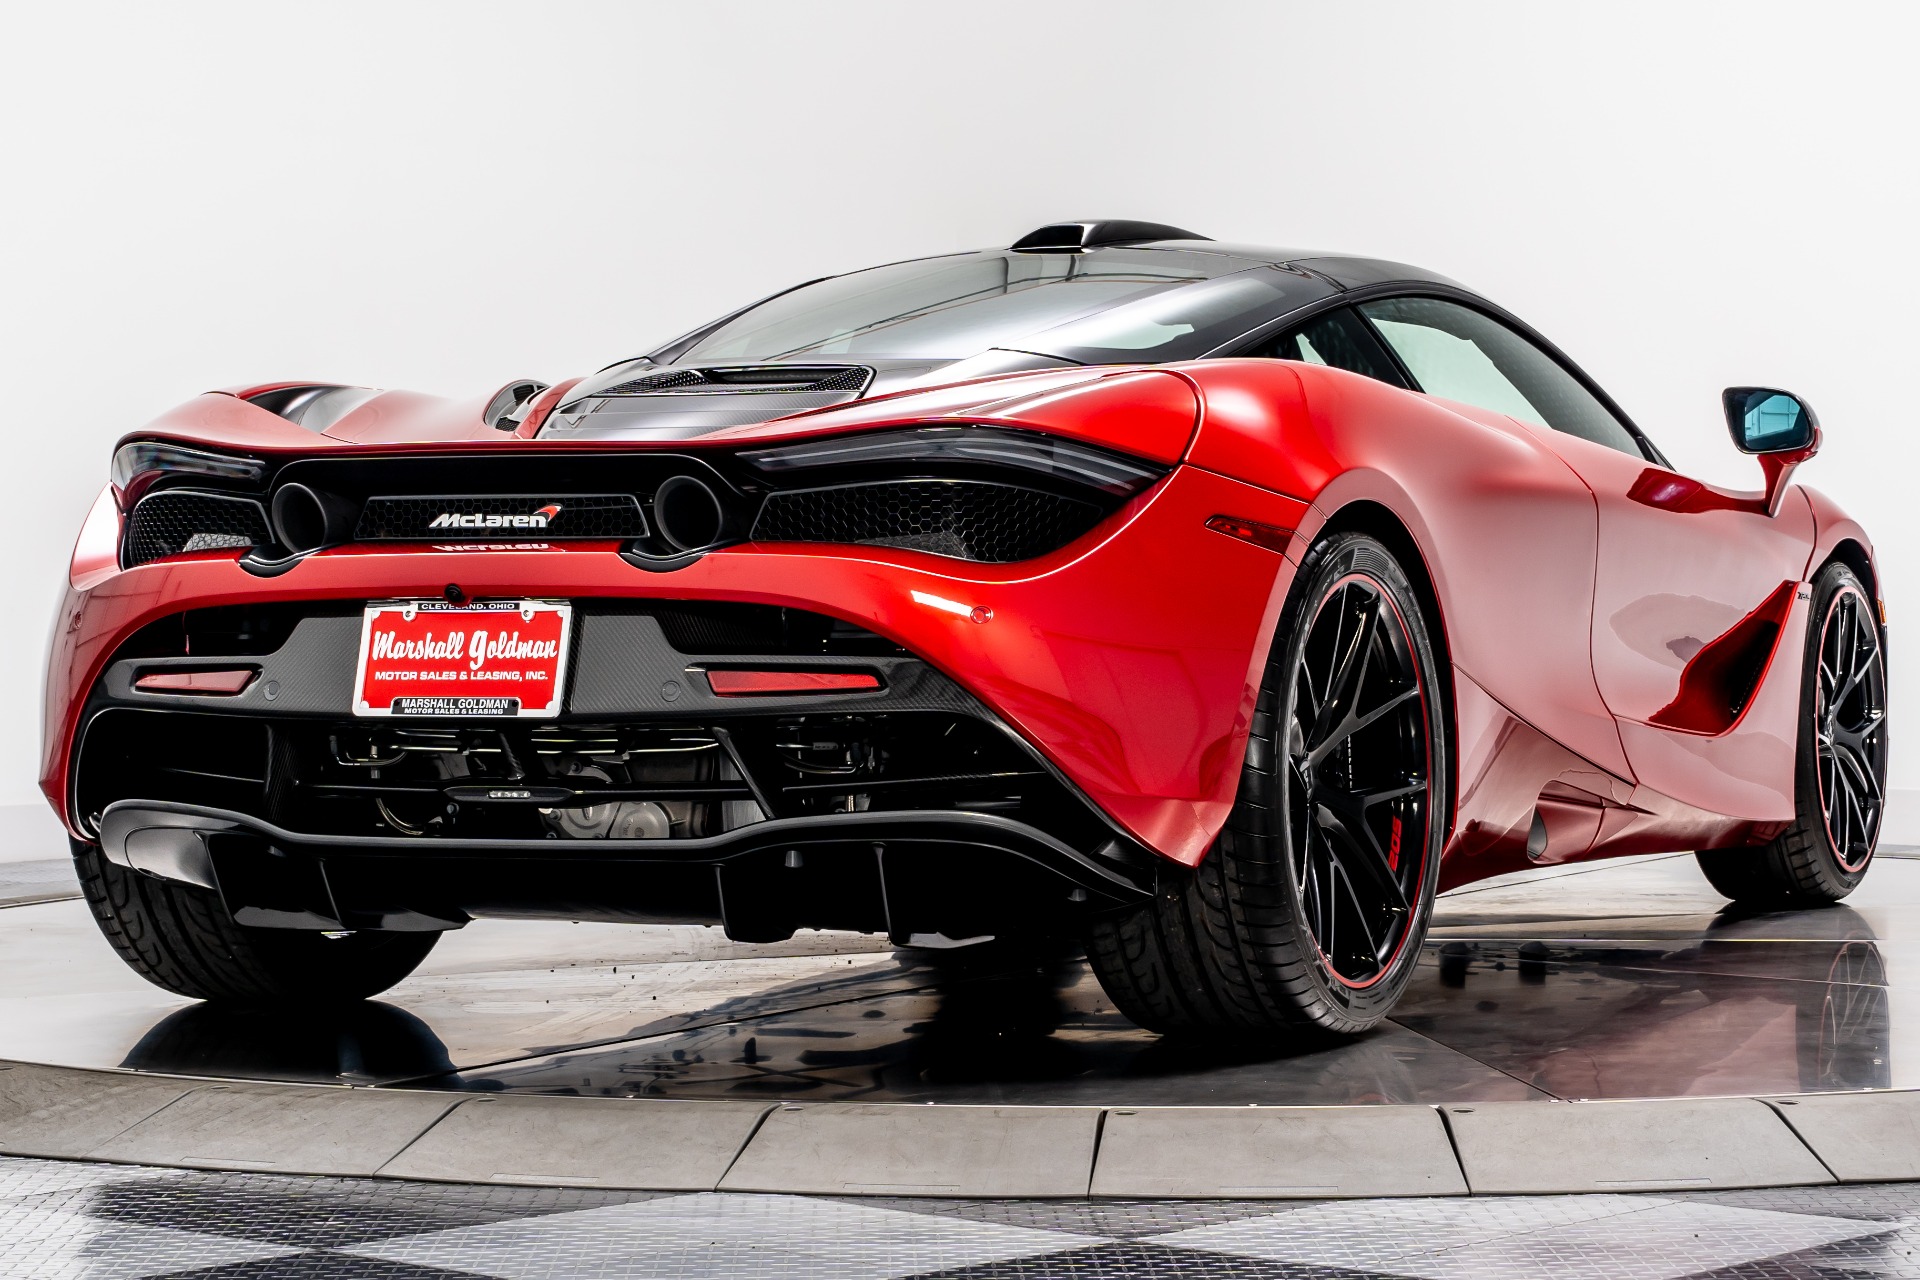 Used 2018 McLaren 720S For Sale (Sold)  Marshall Goldman Cleveland Stock  #B20980